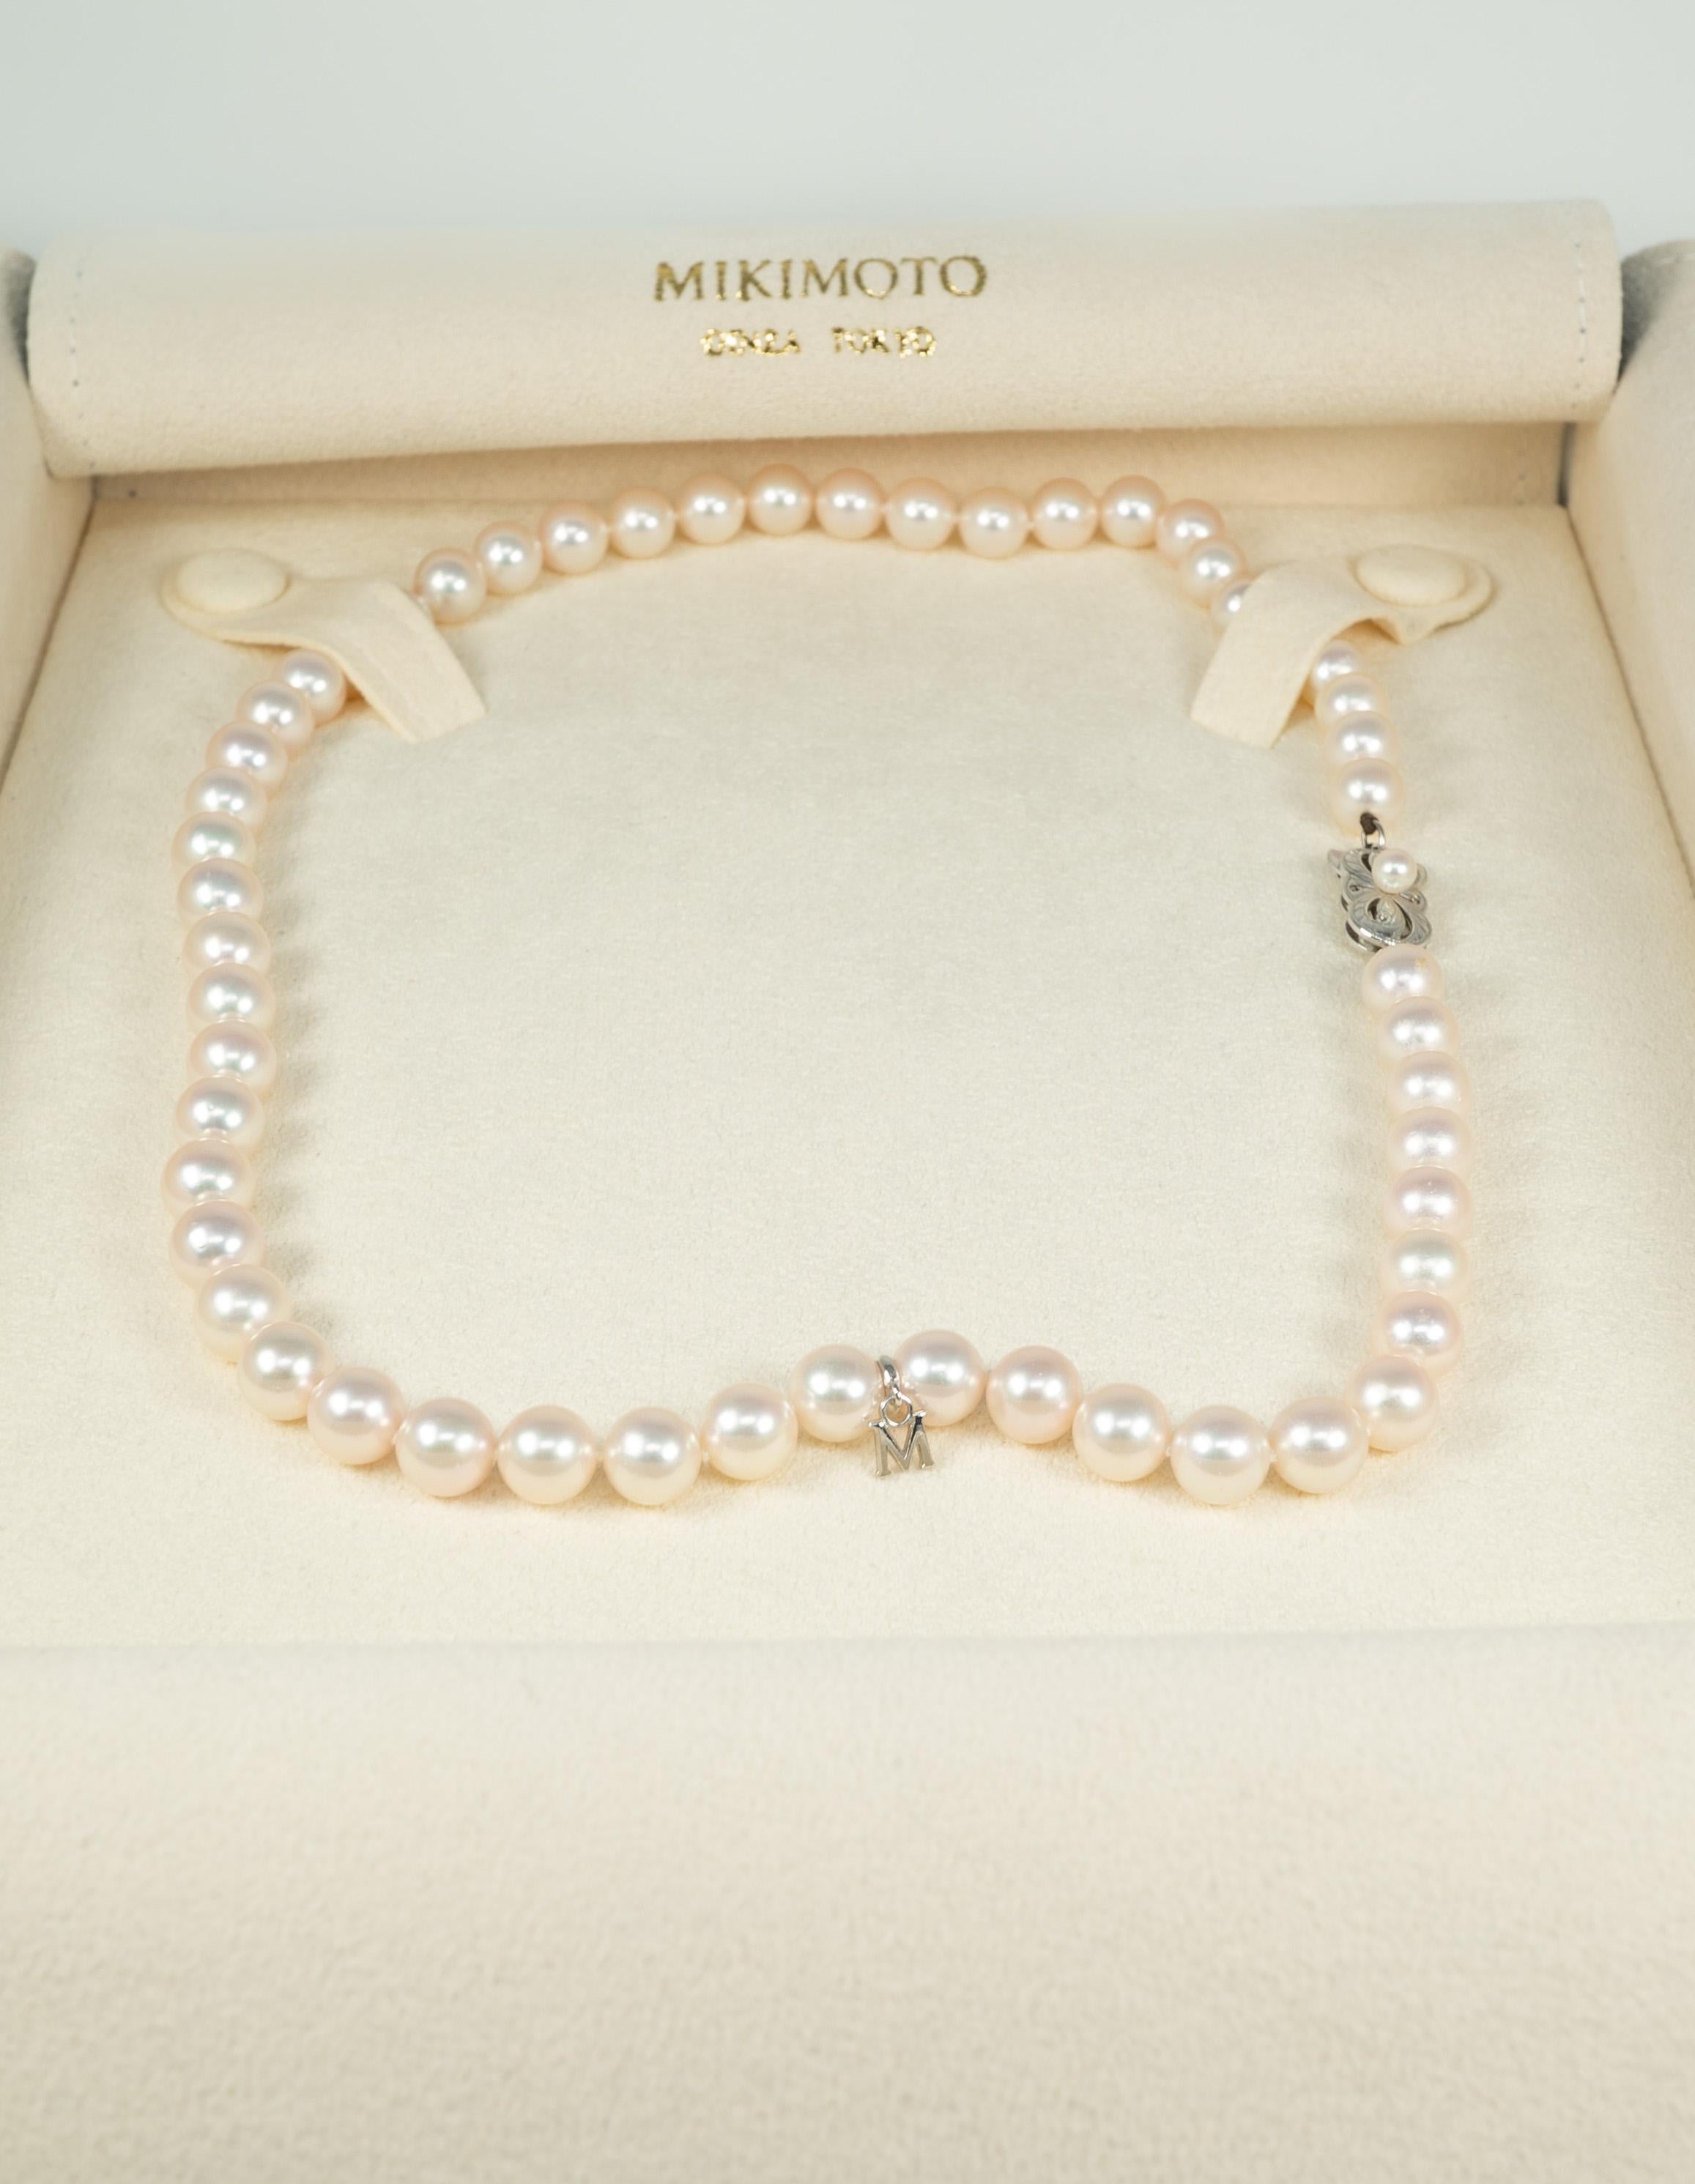 This 18 inch strand of beautifully matched, round cultured pearls is by famous pearl maker Mikimoto.  The pearls measure from 7.50 mm to 7.75 mm, the luster is high and the match is excellent! The fish-hook clasp is in 18 karat yellow gold and the